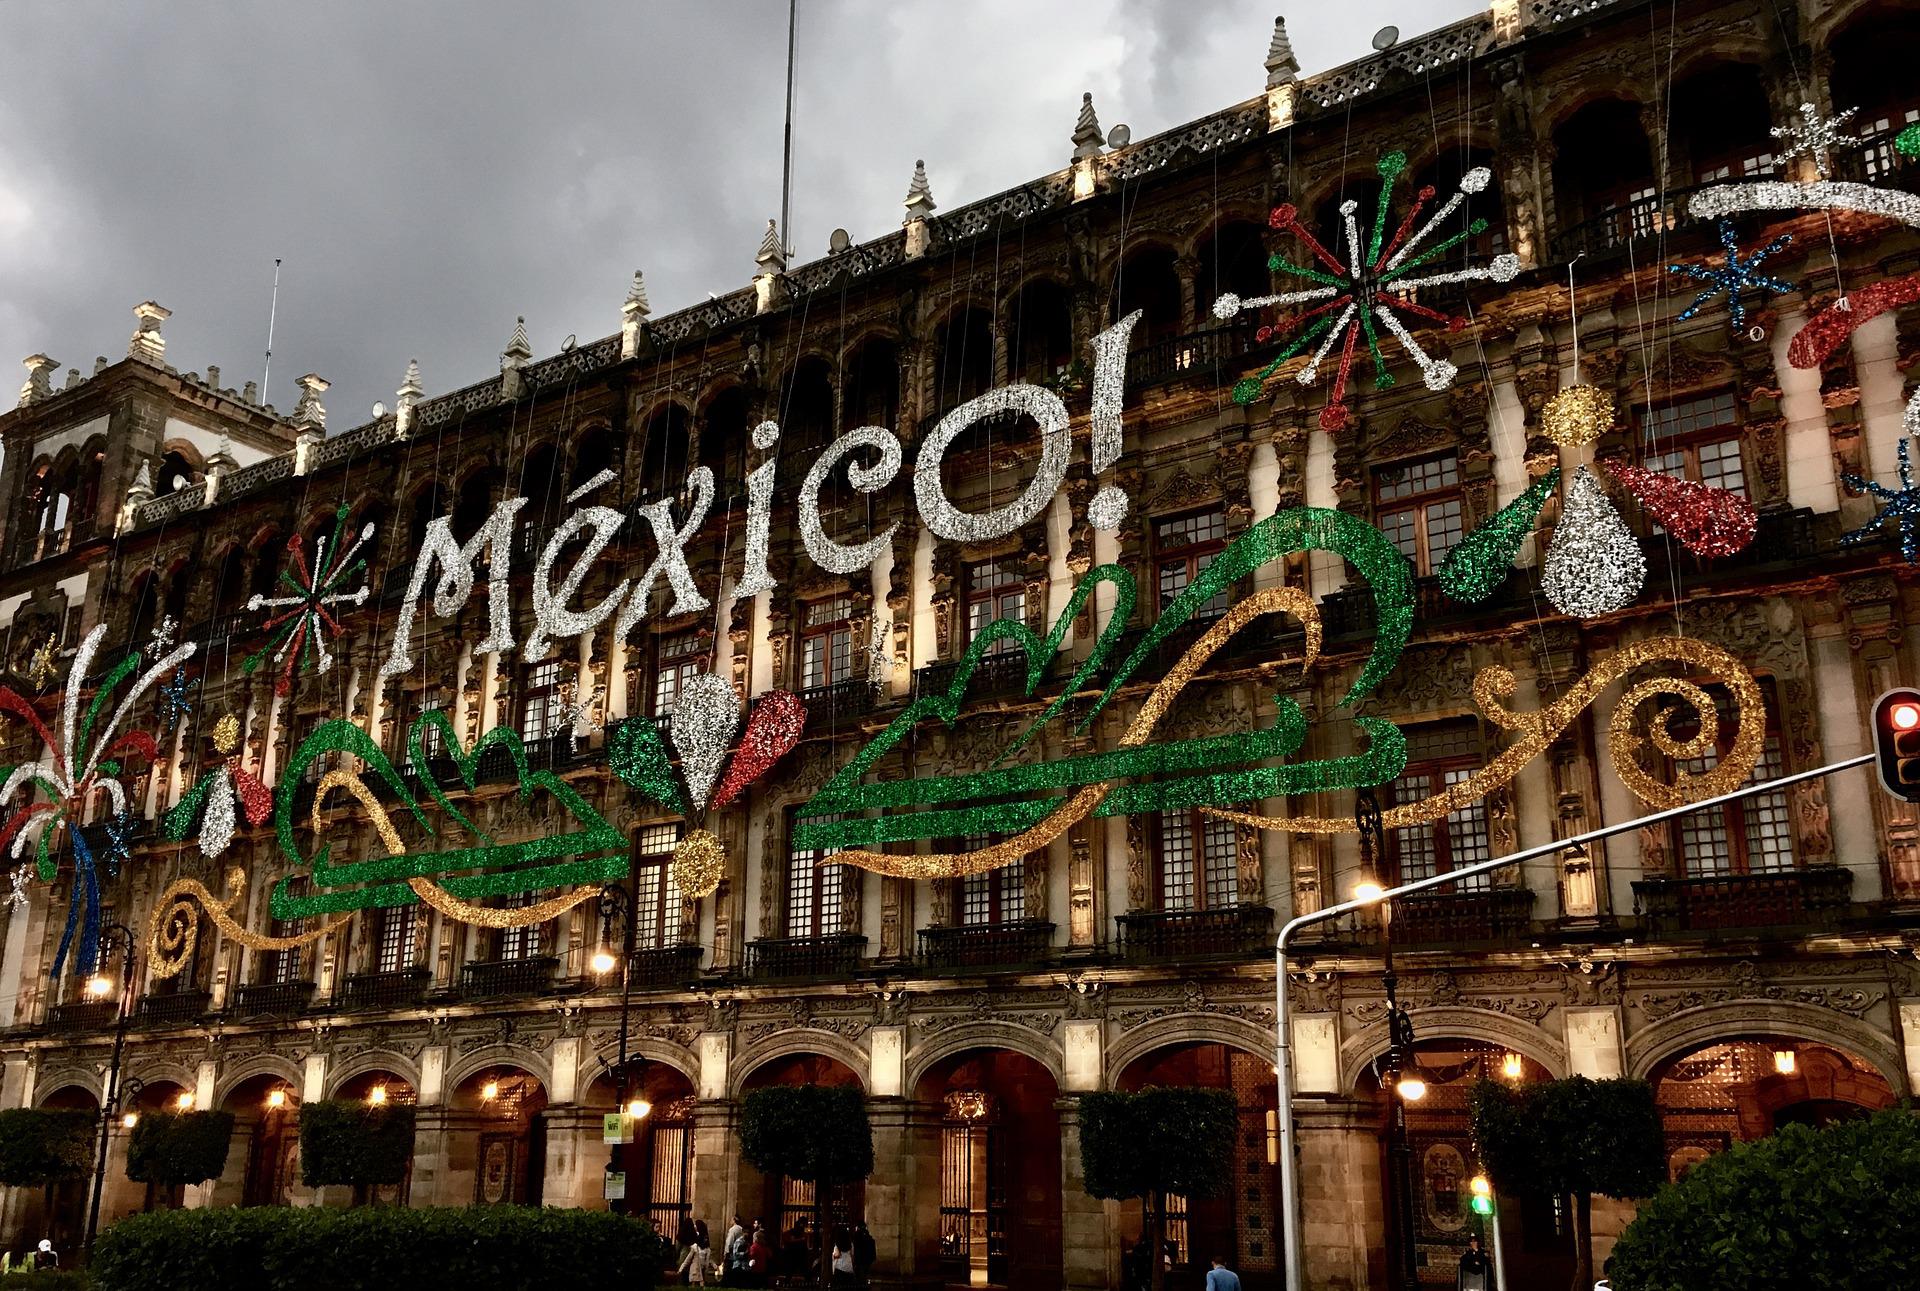 American Millennial scourge is destroying Mexico City’s culture